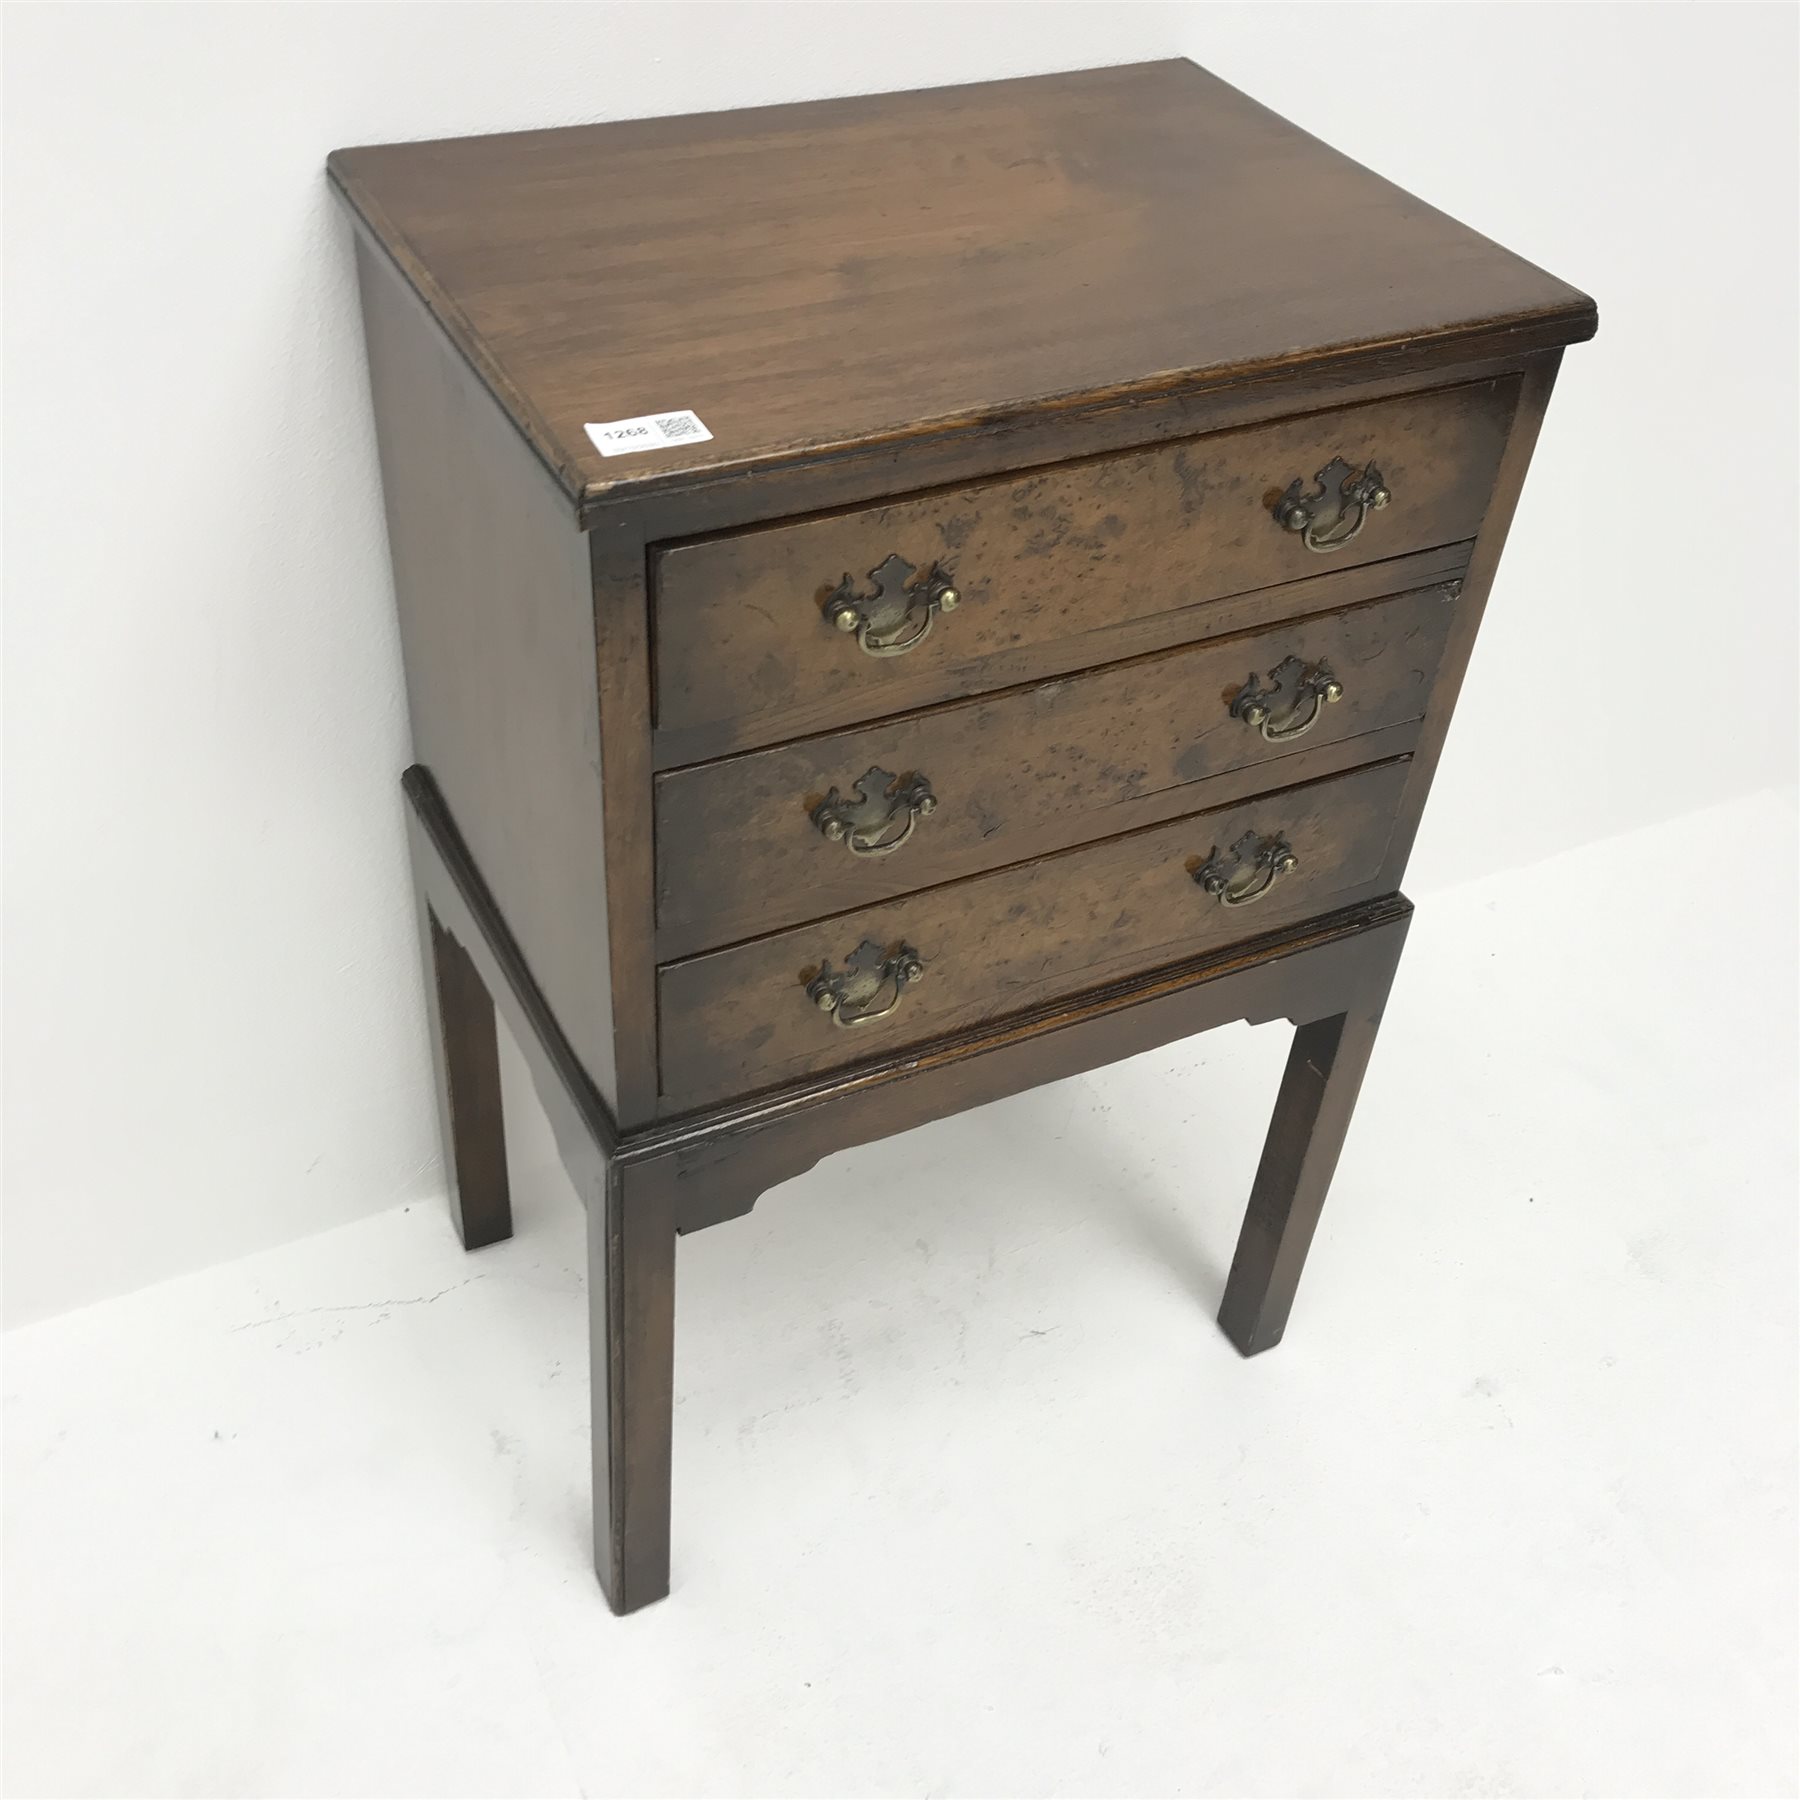 Small early 20th century mahogany chest on stand, three walnut burr veneered drawers, square suppor - Image 3 of 4